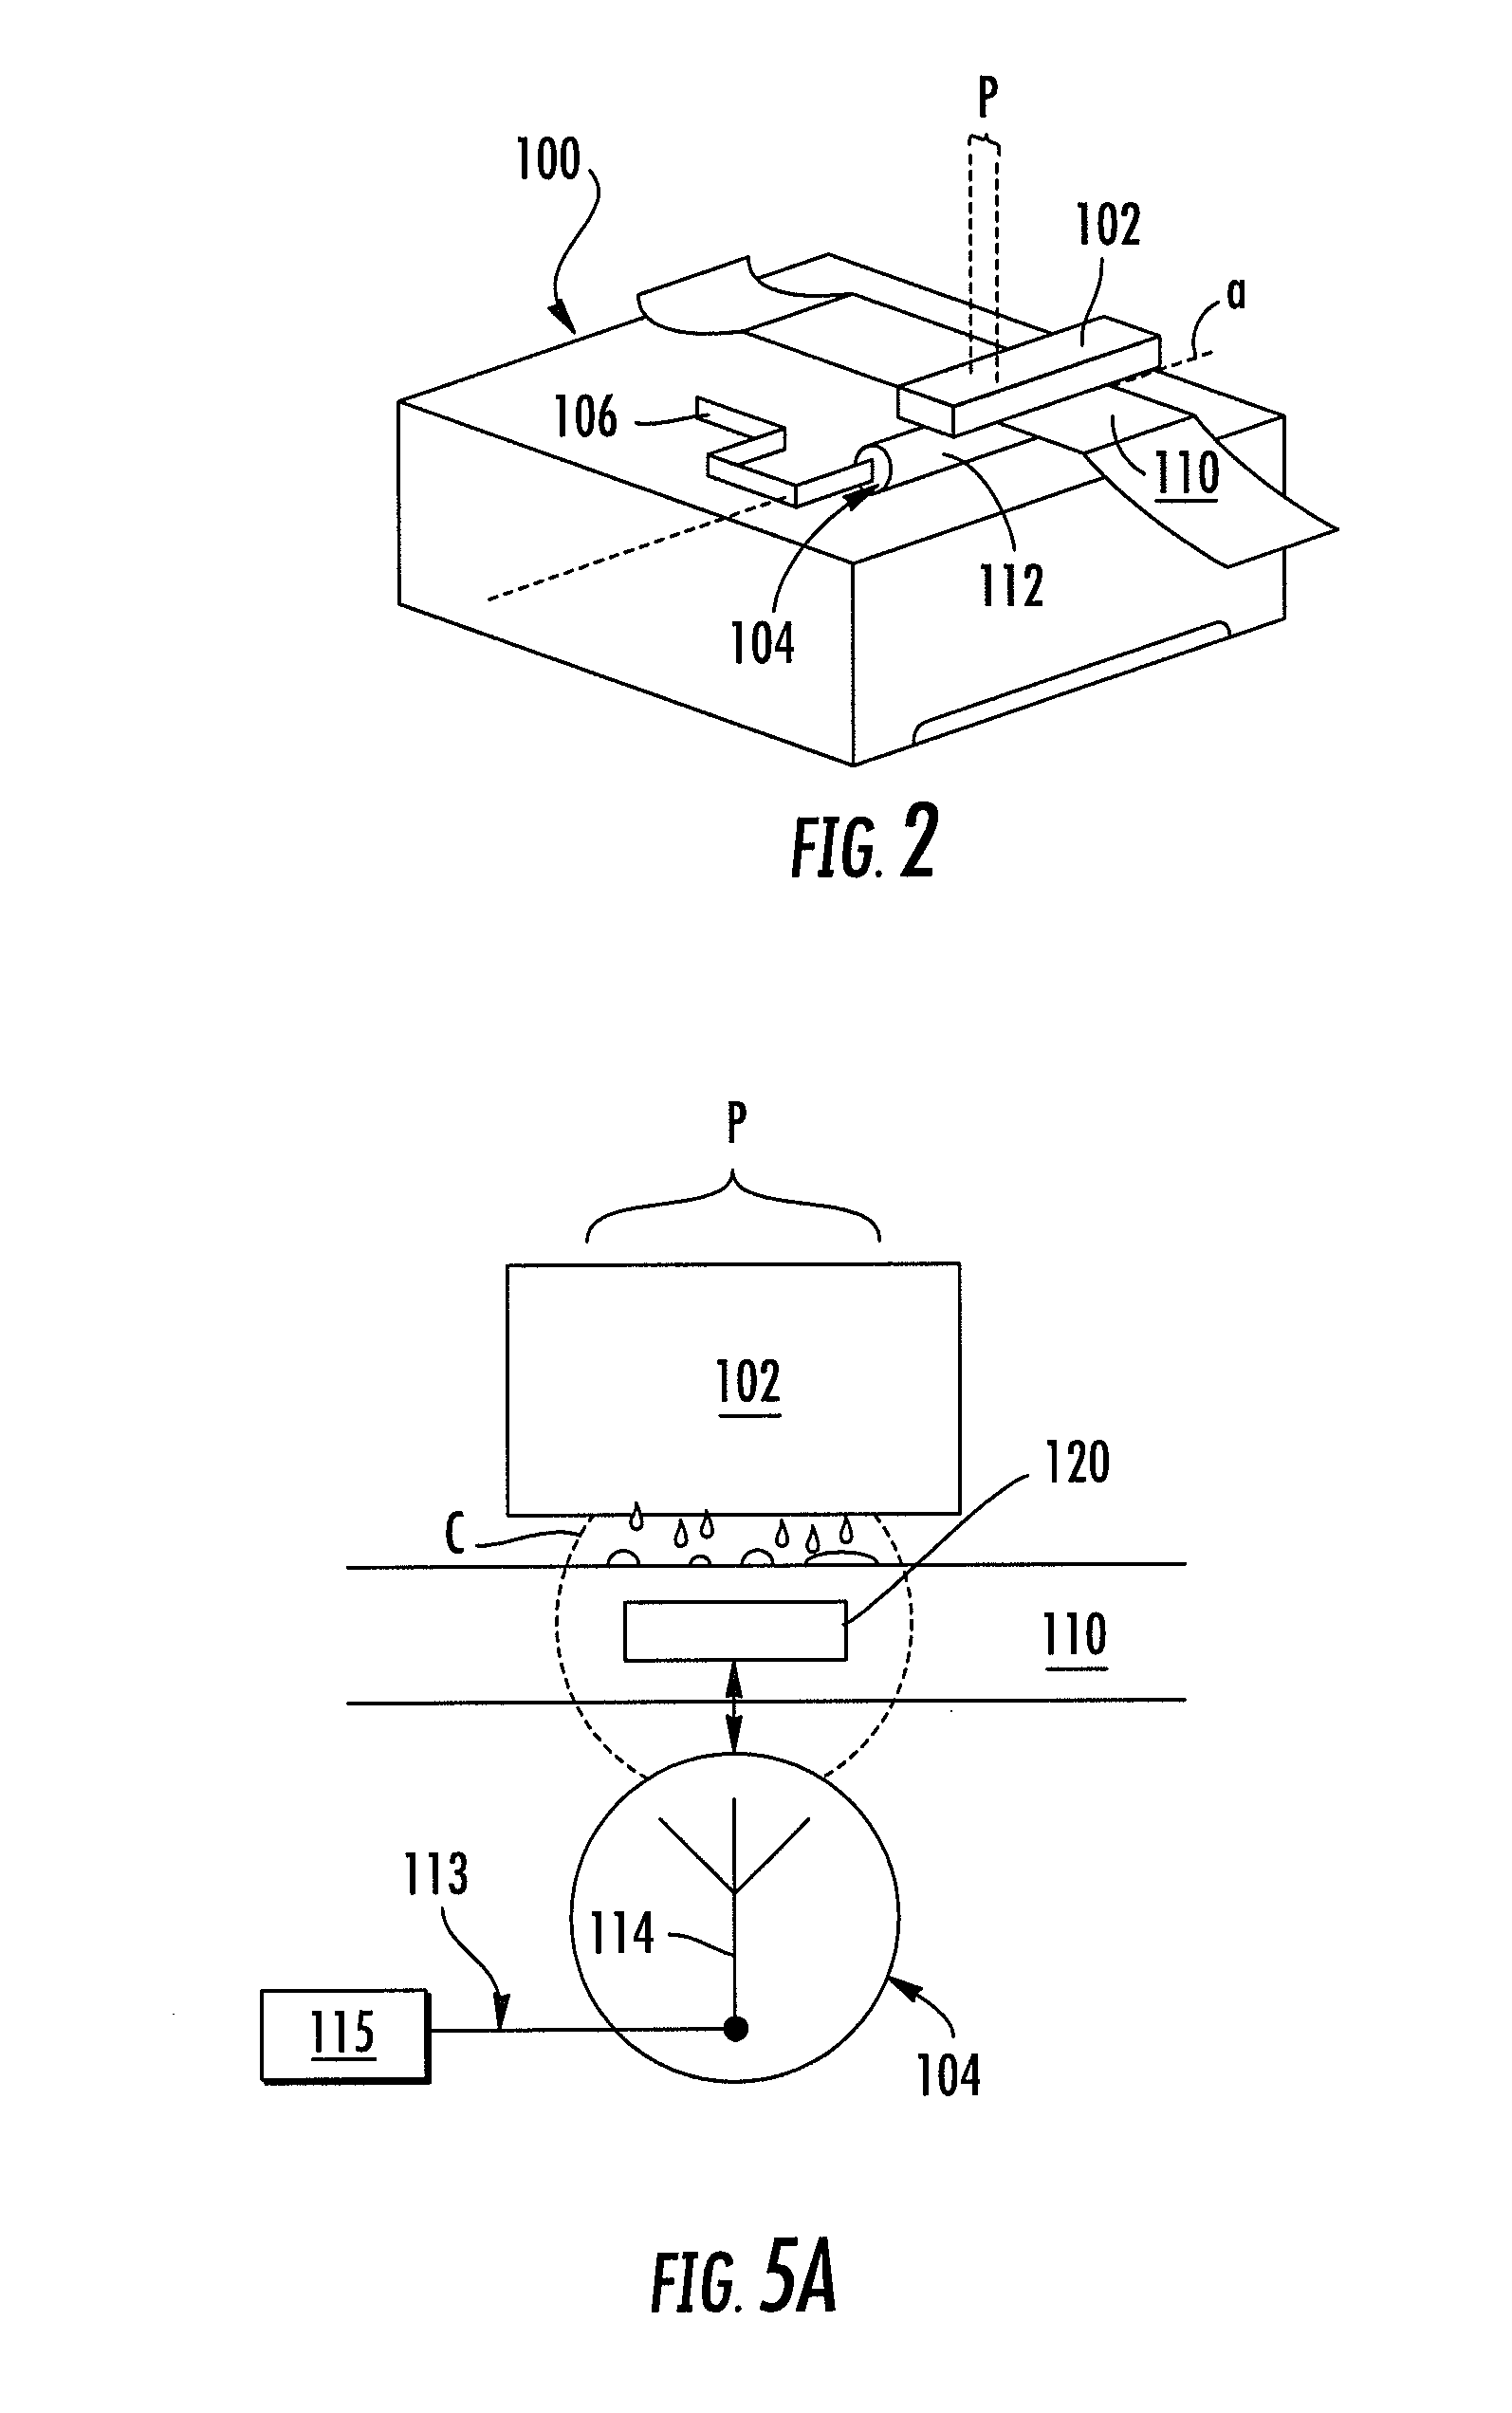 Platen incorporating an RFID coupling device